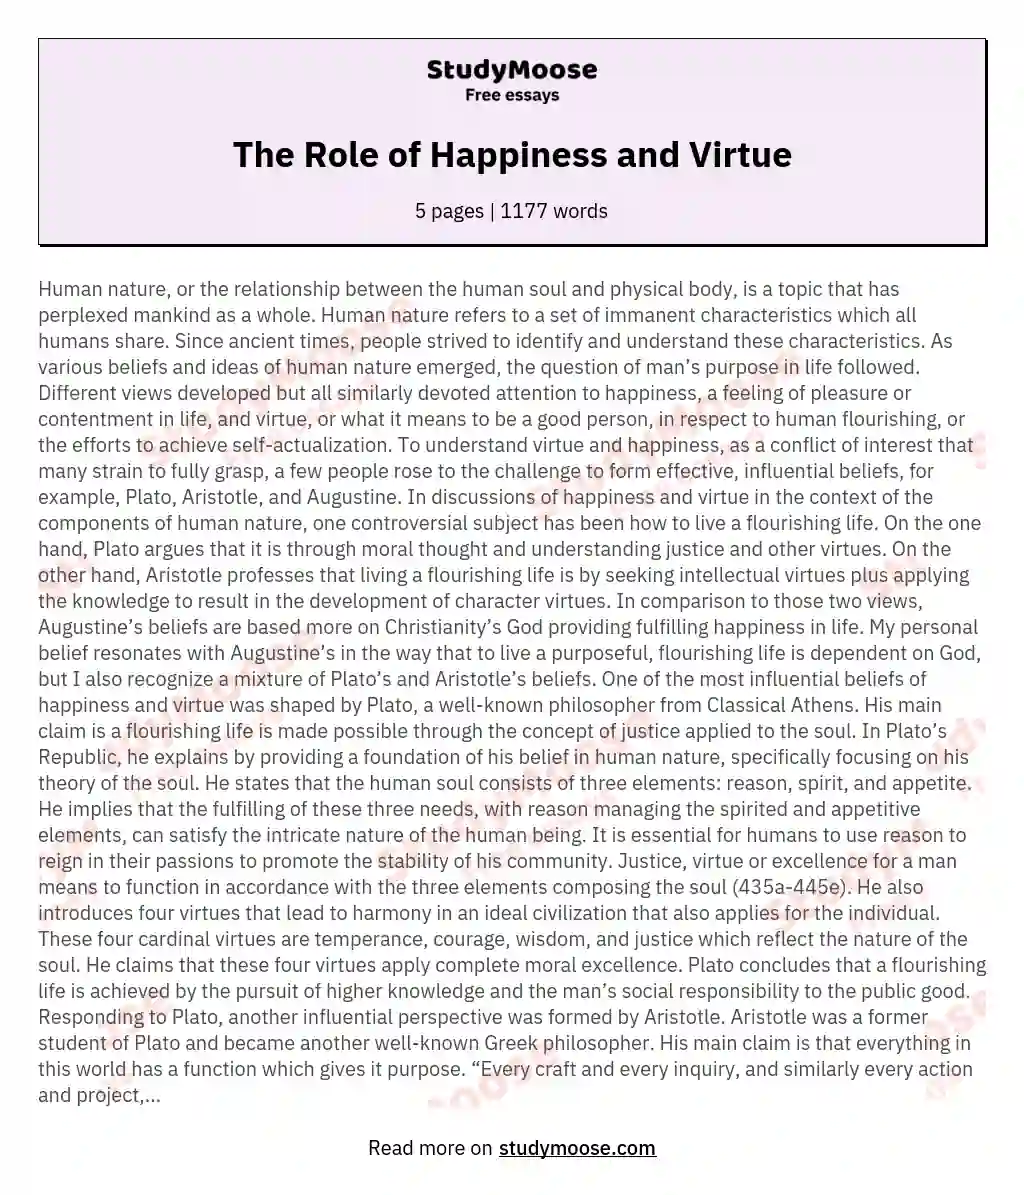 The Role of Happiness and Virtue essay